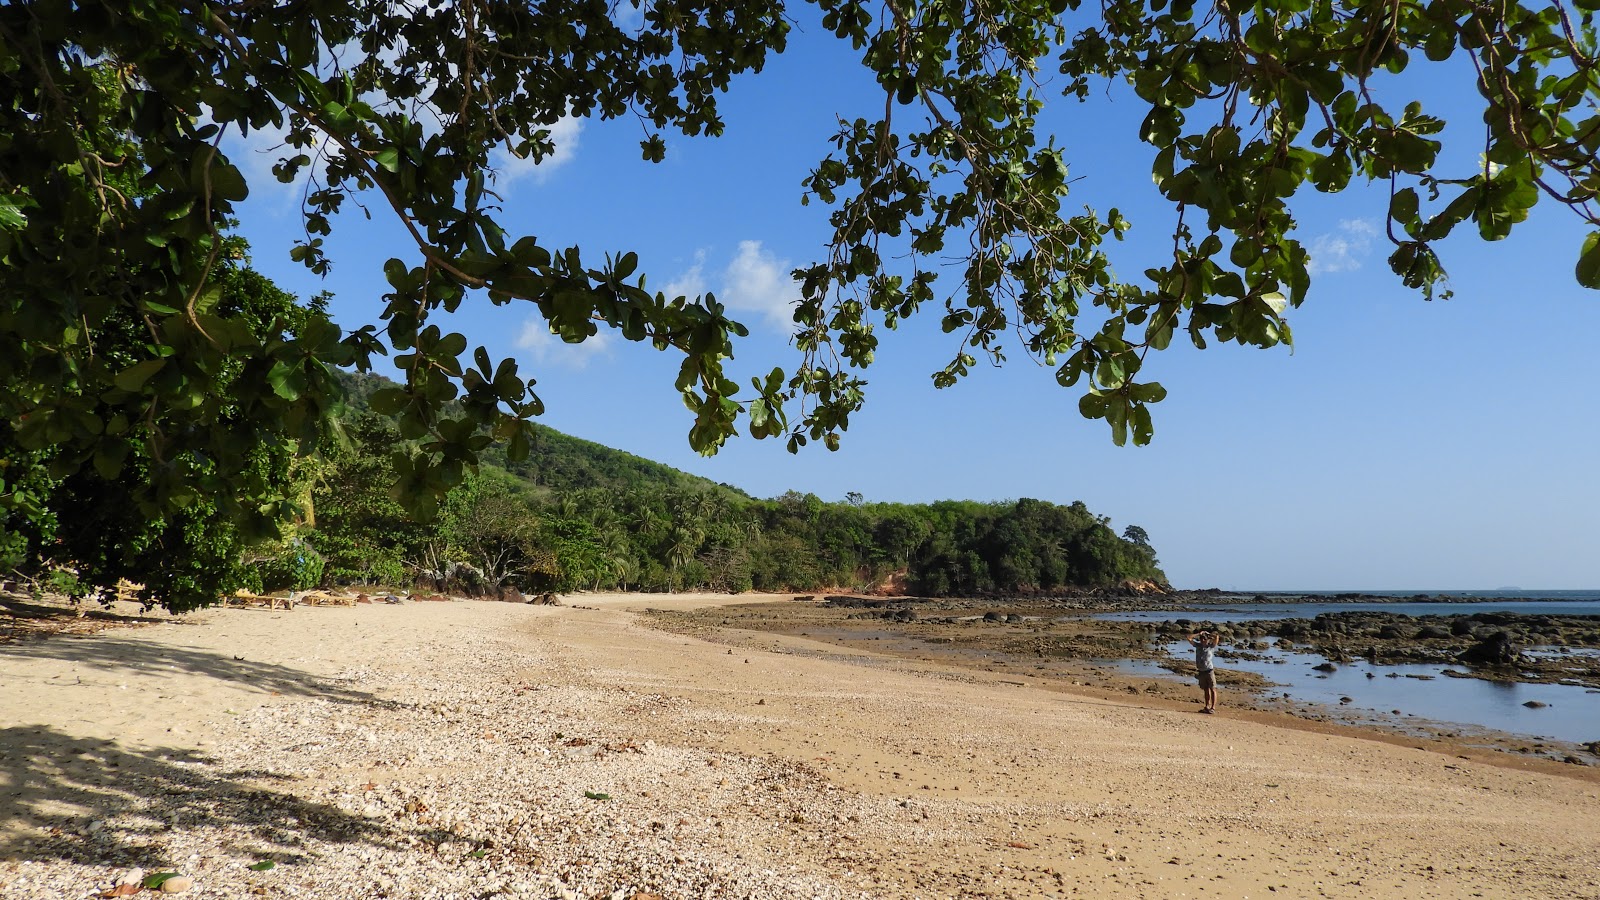 Photo of LangKhao Beach and the settlement